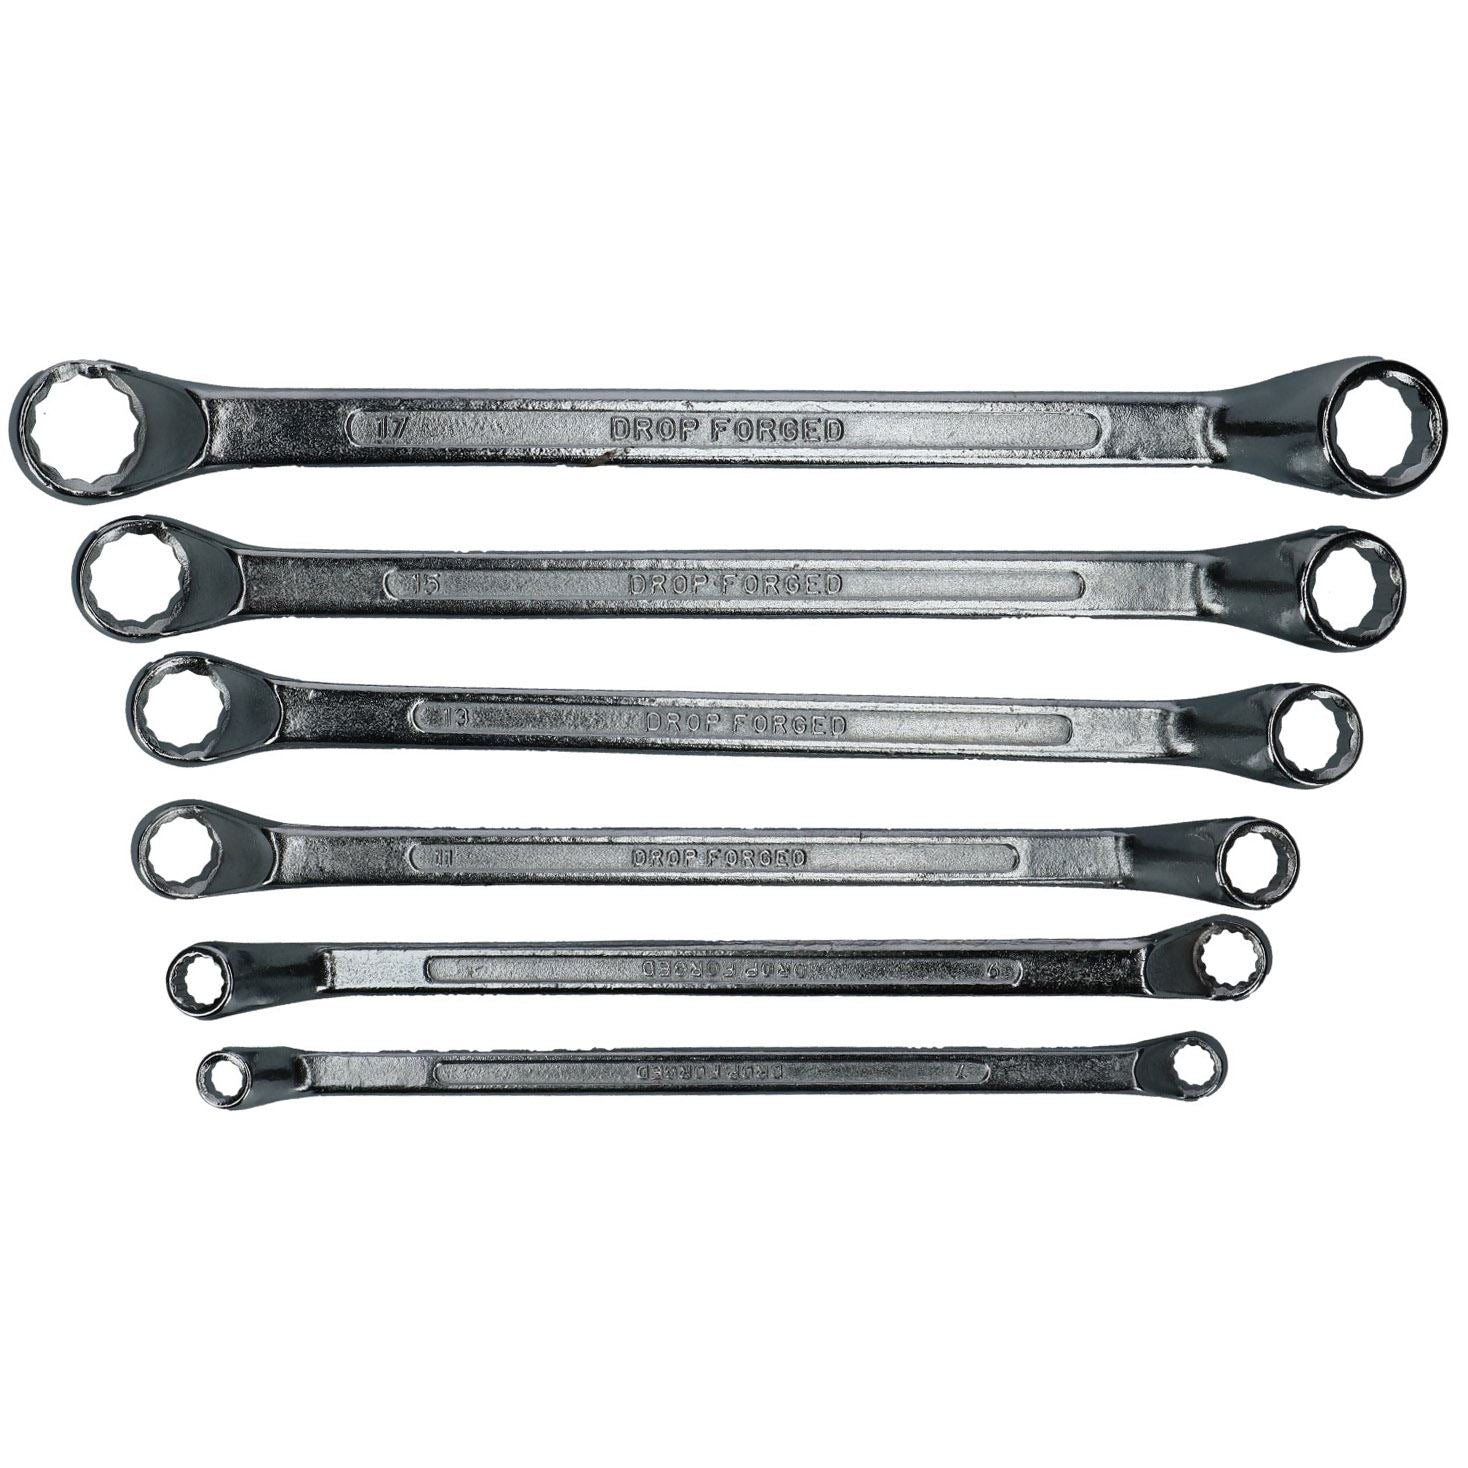 Metric Double Ended Bi-hex Ring Spanners 6mm - 17mm 6 Spanners 12 Sizes